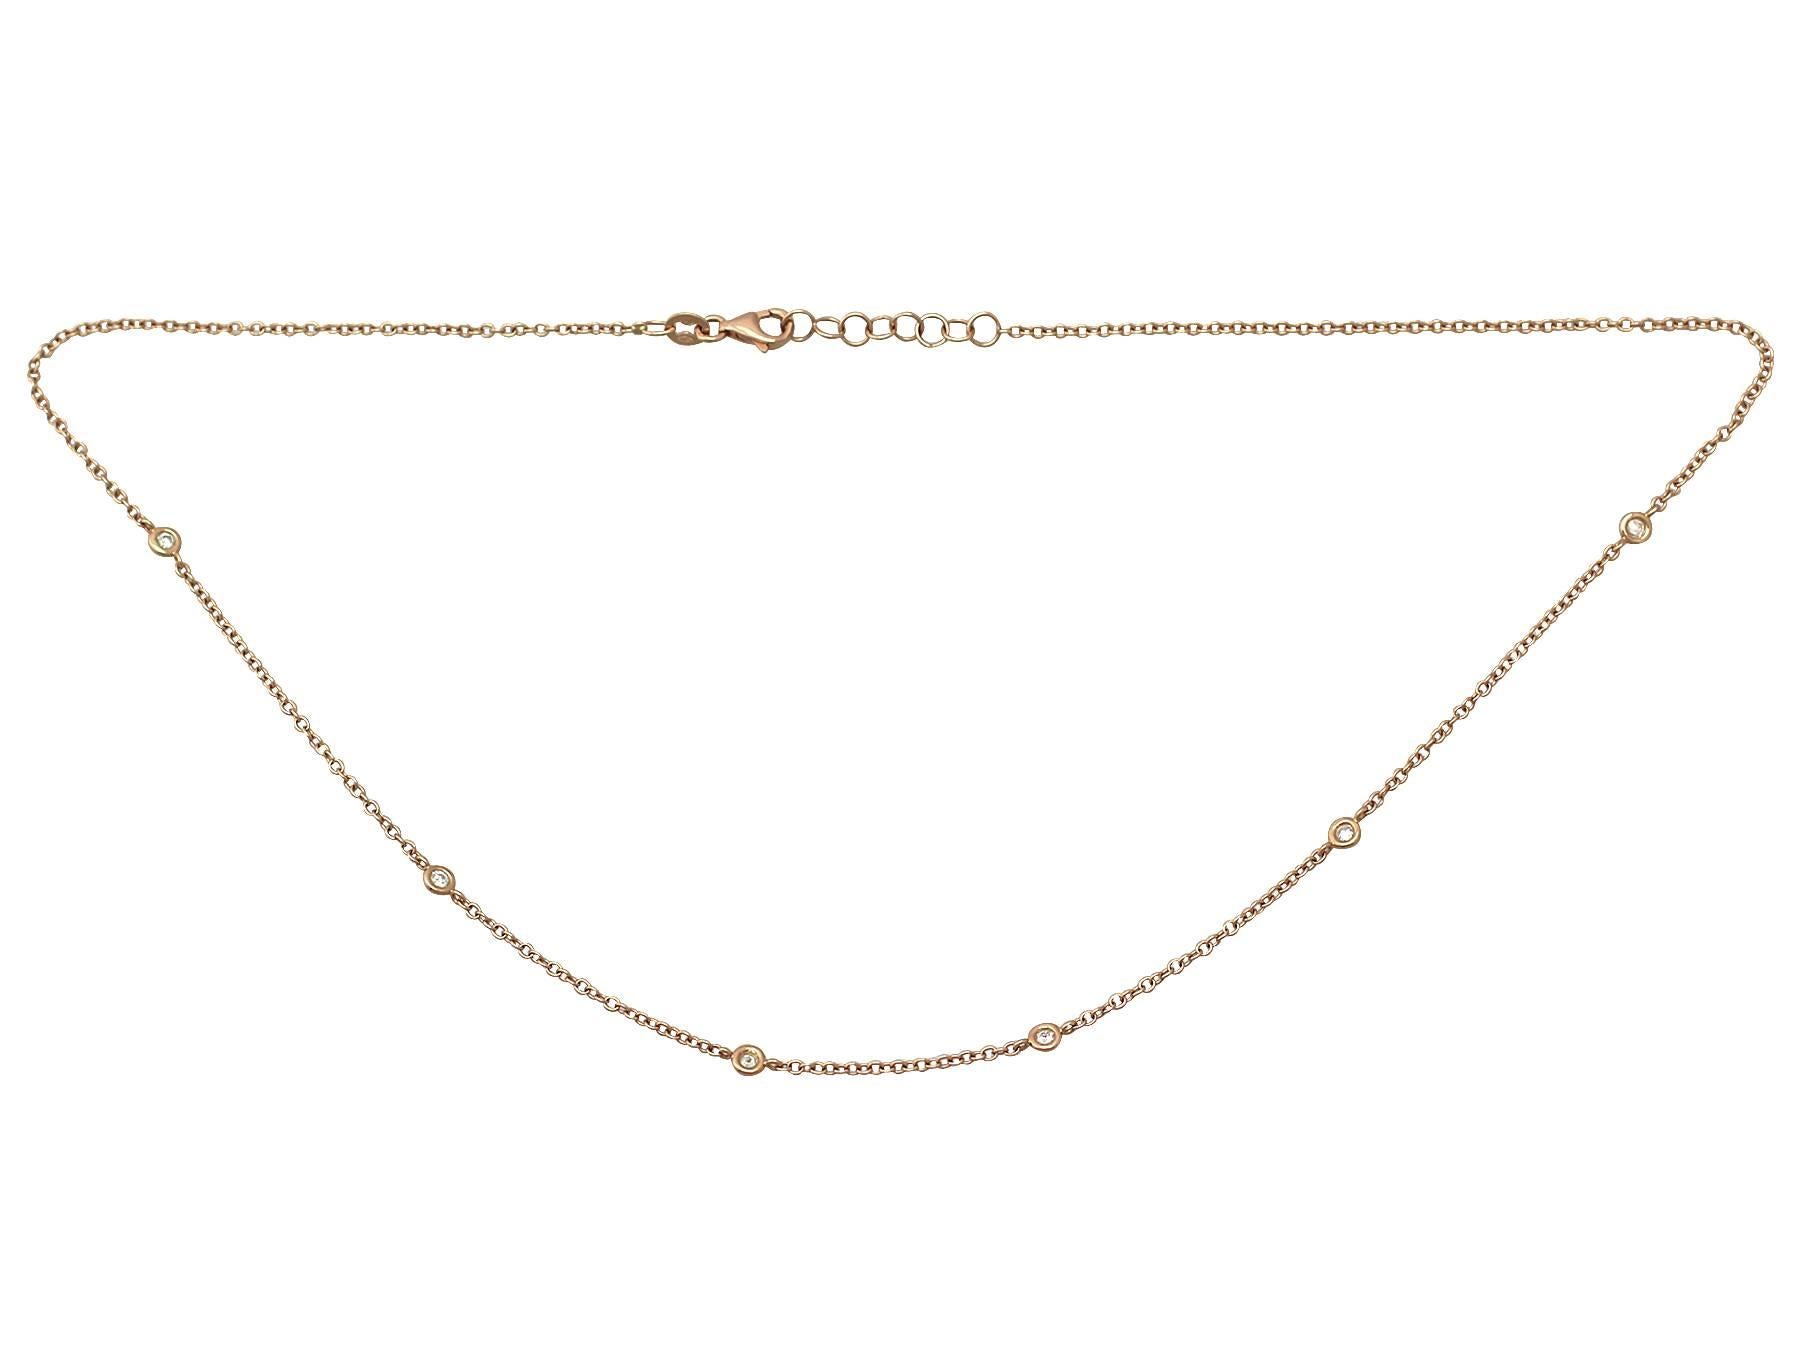 A fine vintage Italian 0.12 carat diamond and 18 karat rose gold necklace; part of our diverse vintage jewelry and estate jewelry collections

This fine vintage diamond necklace has been crafted in 18k yellow gold.

The fine link belcher chain is